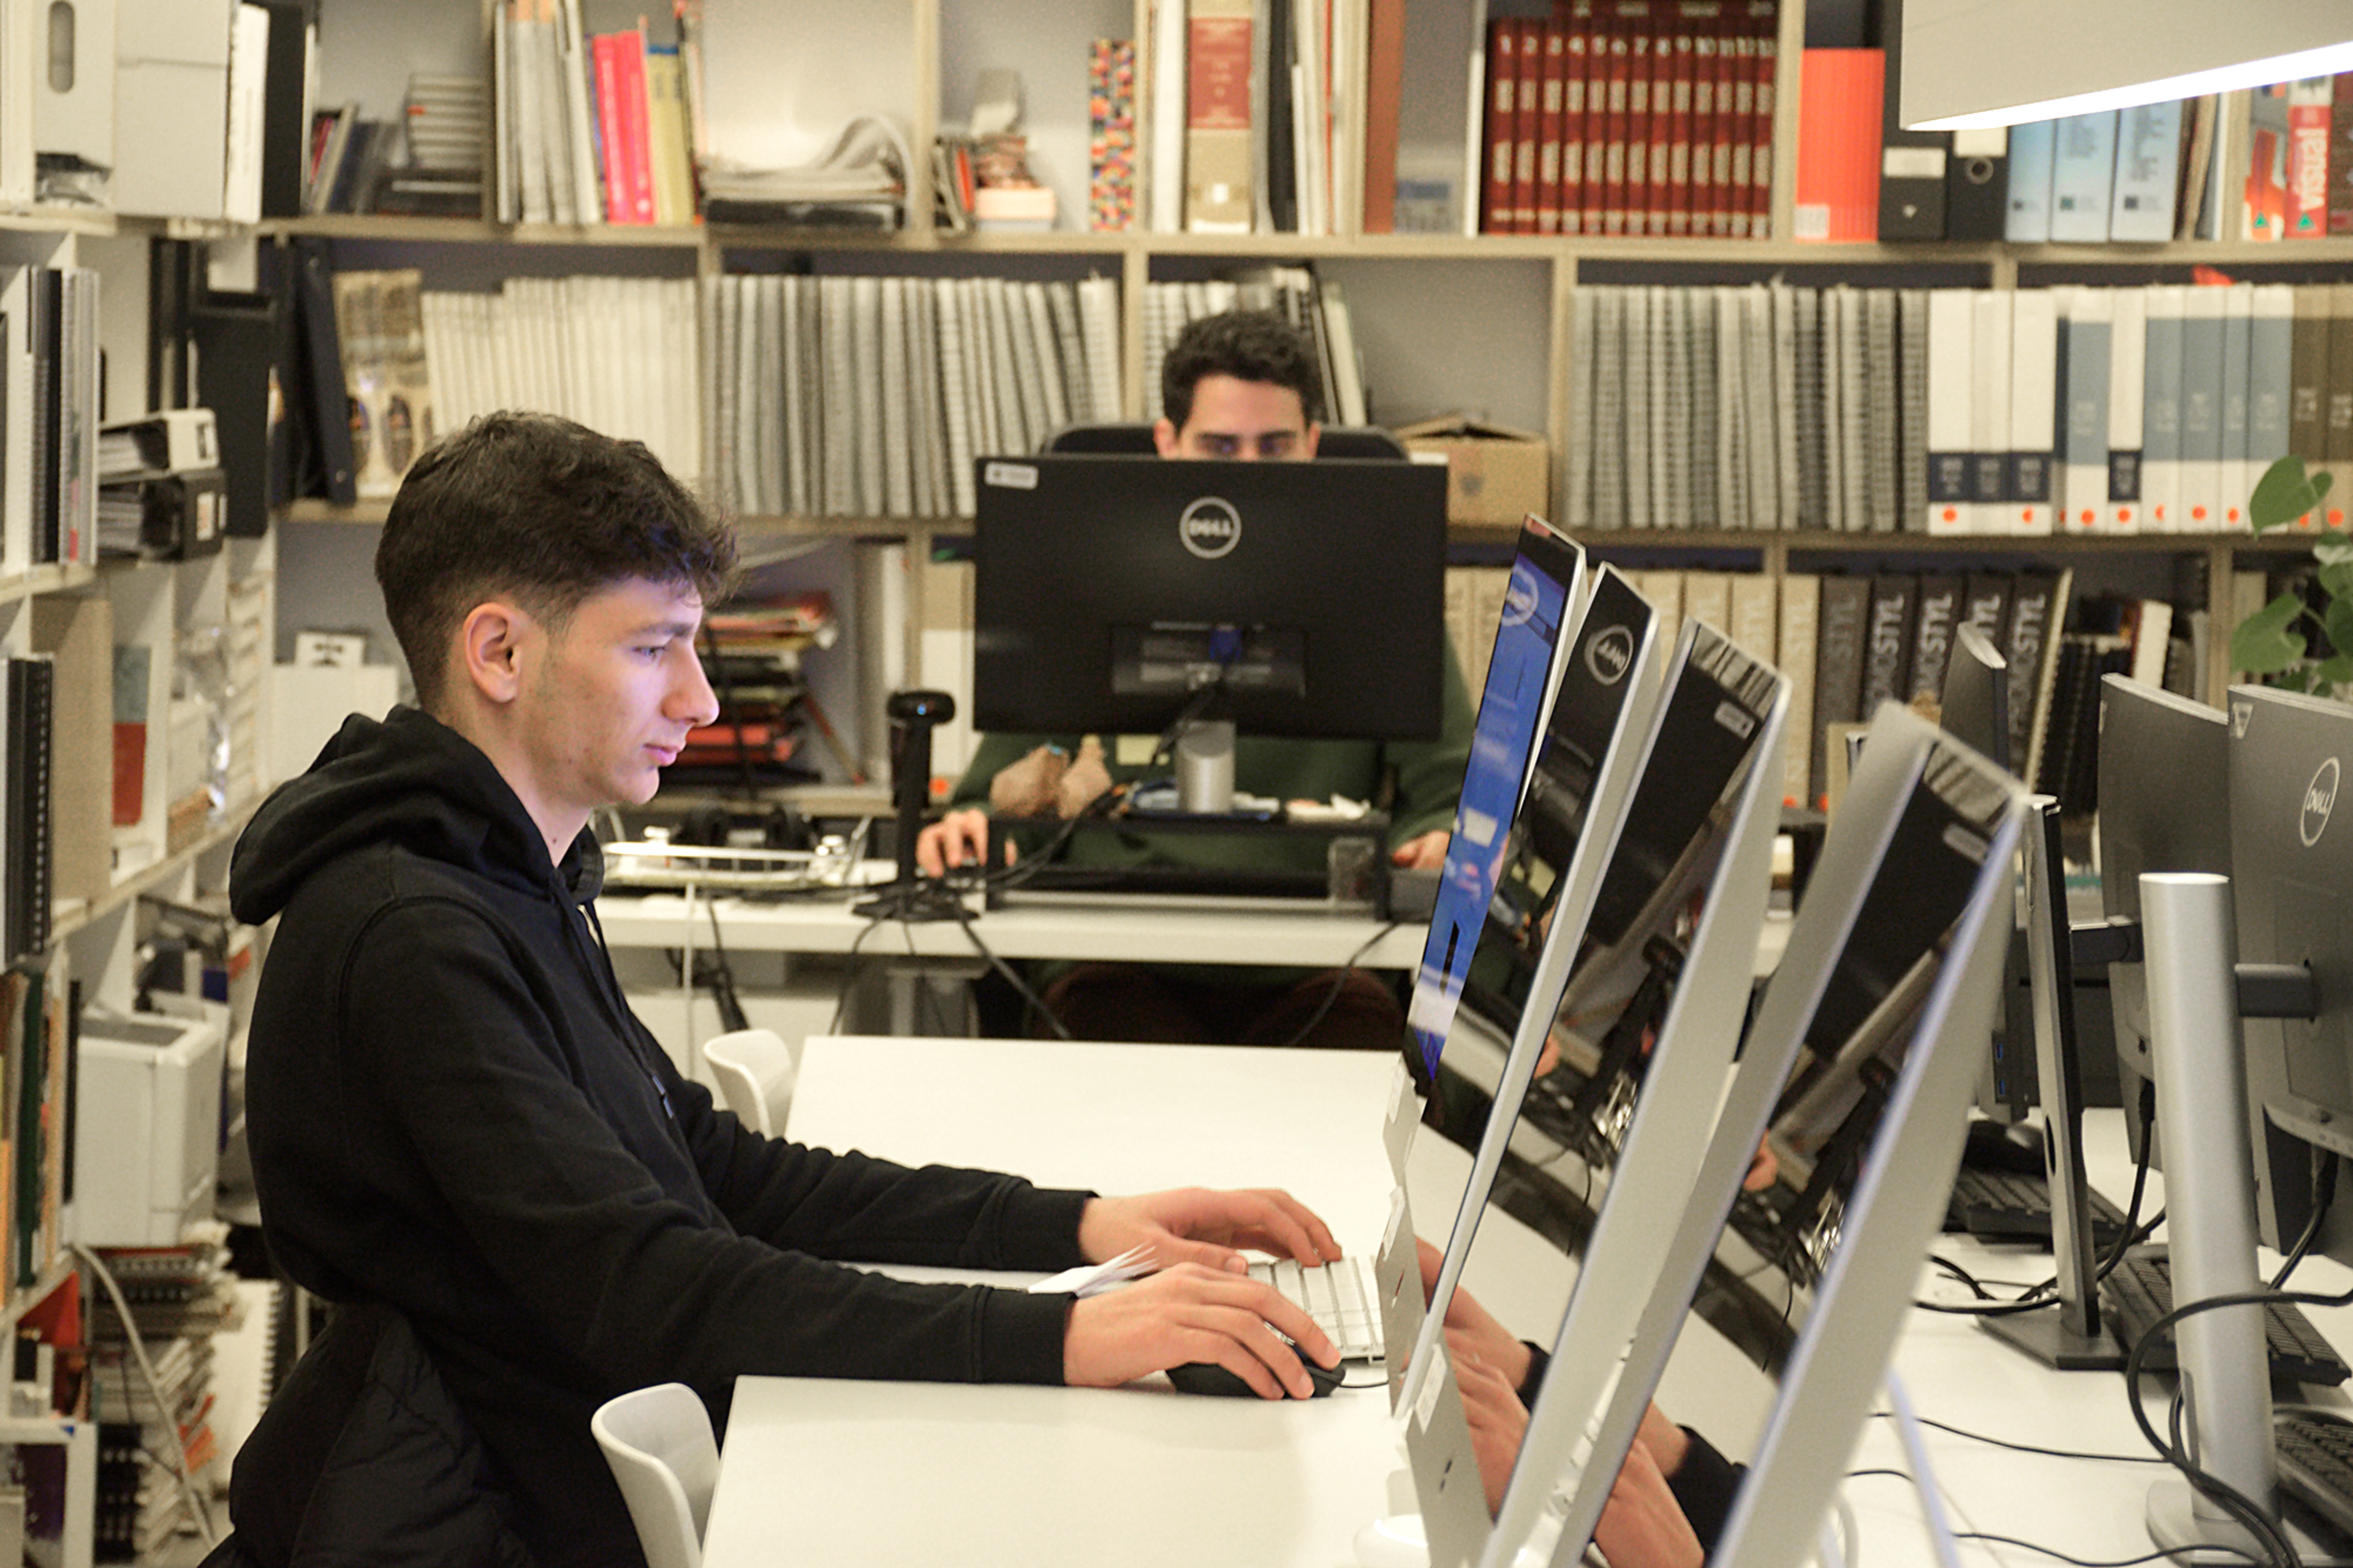 A focused individual typing on a desktop computer in a modern library with books and another person in the background.